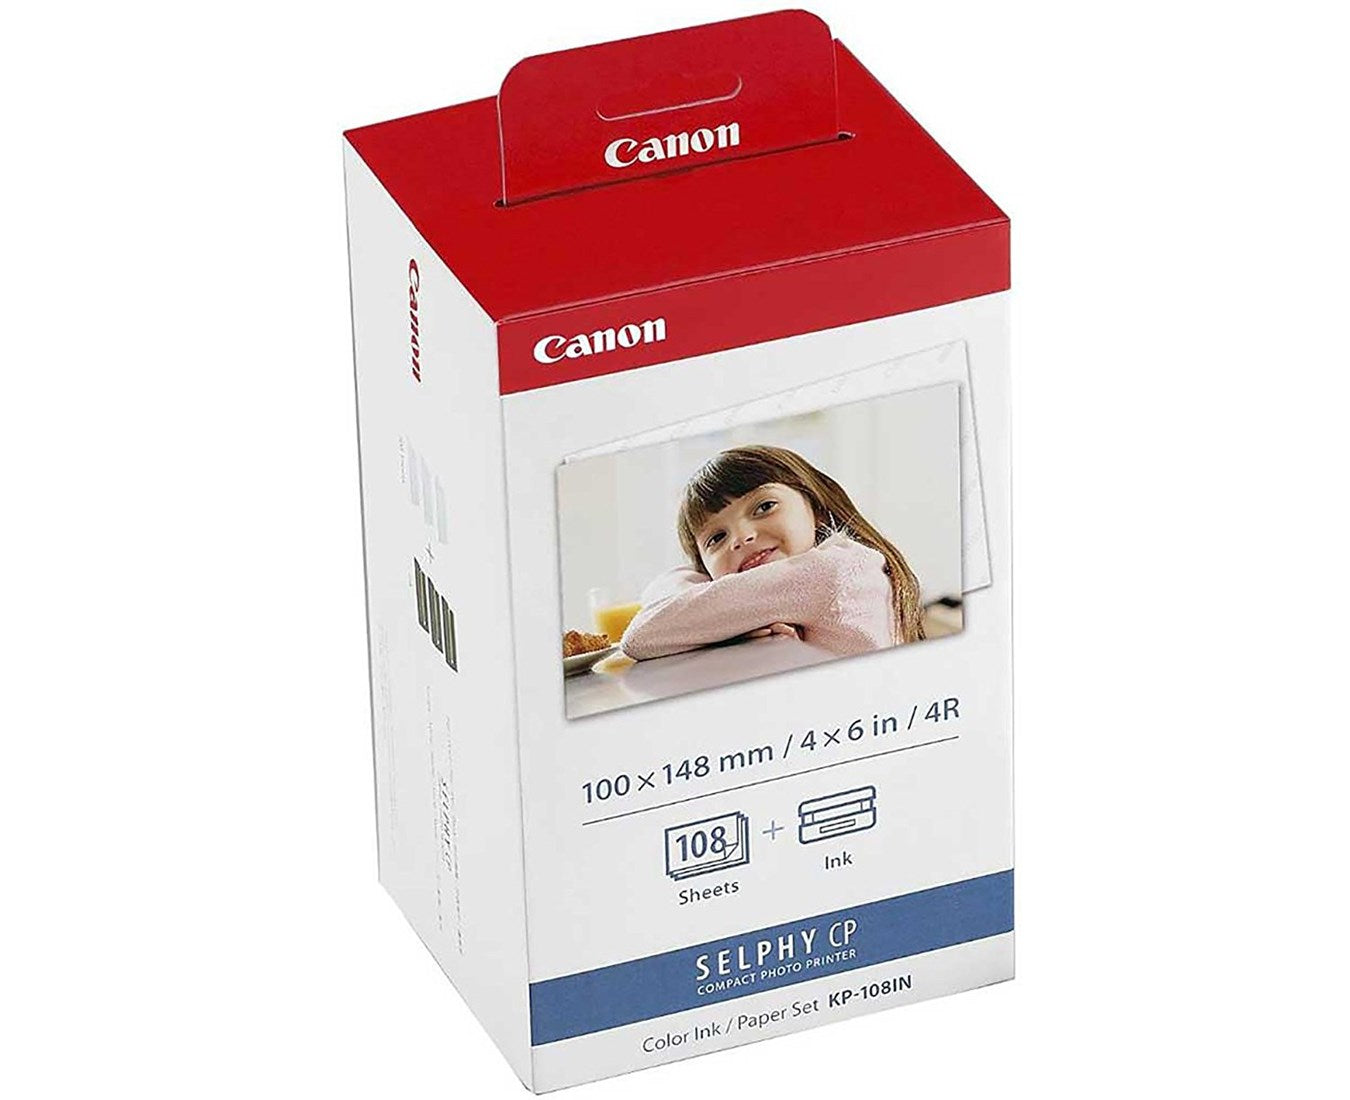 Product Image of Canon KP-108IN Ink - Paper Set for CP Selphy series printer